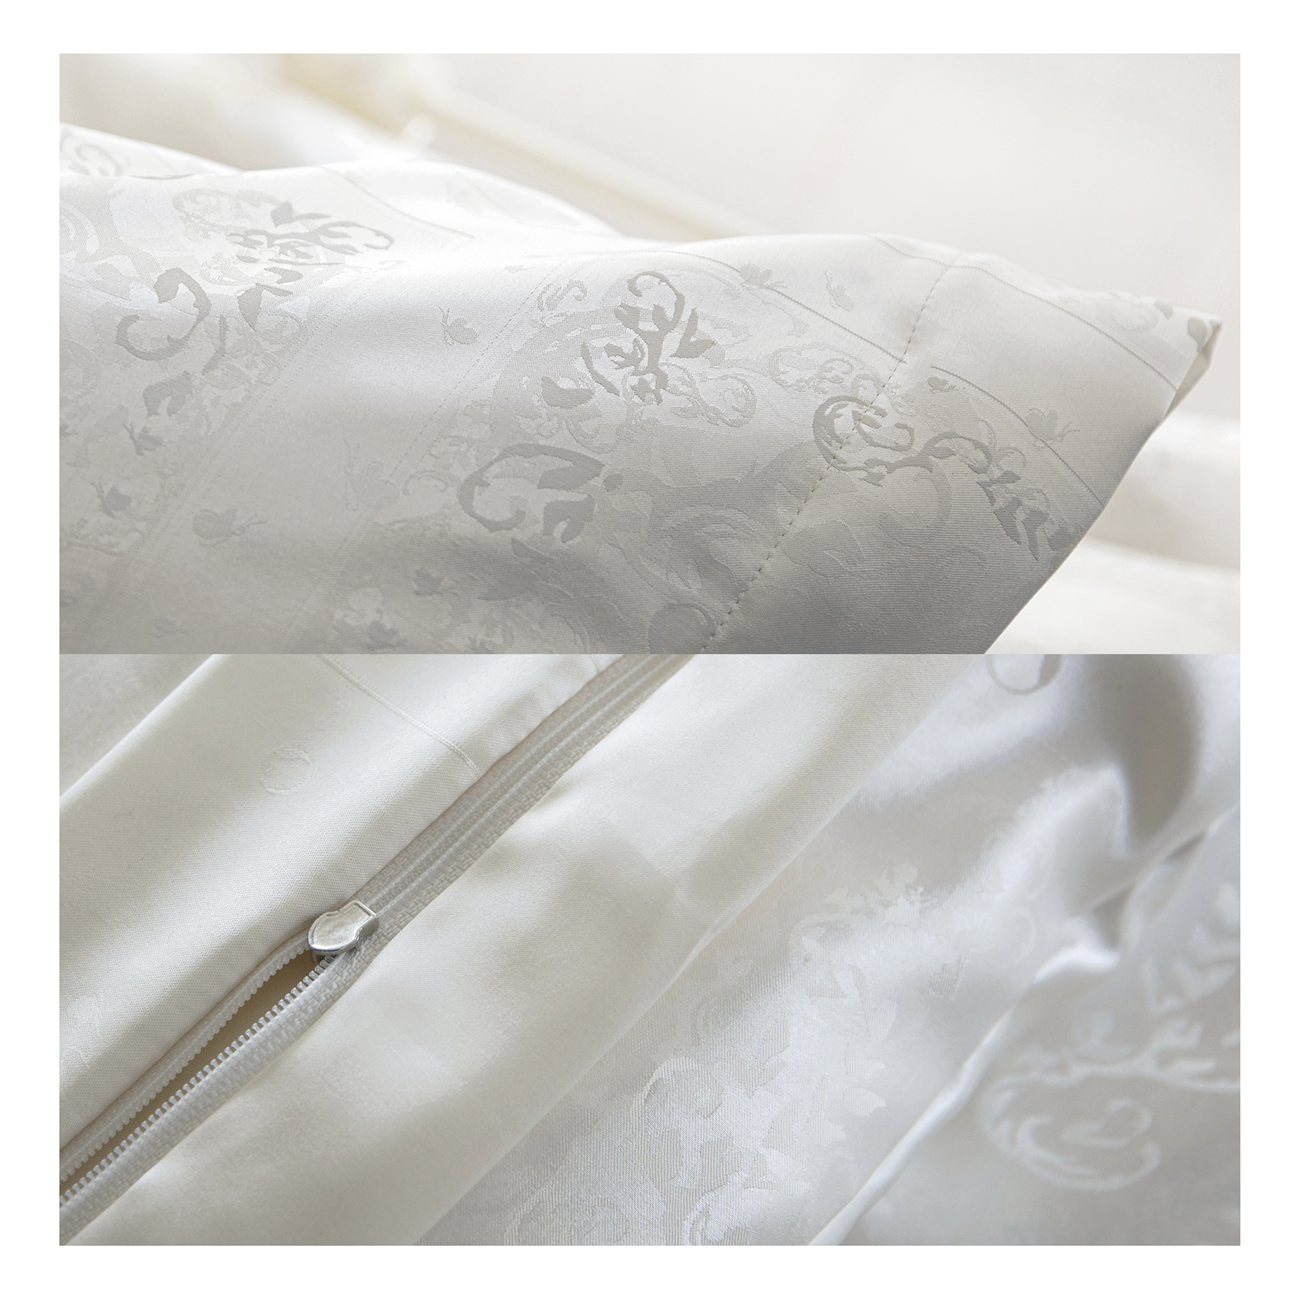 High End Silk Pillowcases The Bubble Bee Silk Jacquard Nature Pillowcase Measures: 40/50 x 60/60 cm Hotel closure/ Zipper closure Frontside: Bubble Bee Silk Jacquard Nature 100% Mulberry silk Backside: Bubble Bee Silk Nature 100% Mulberry silk All stitches finished with a french seams